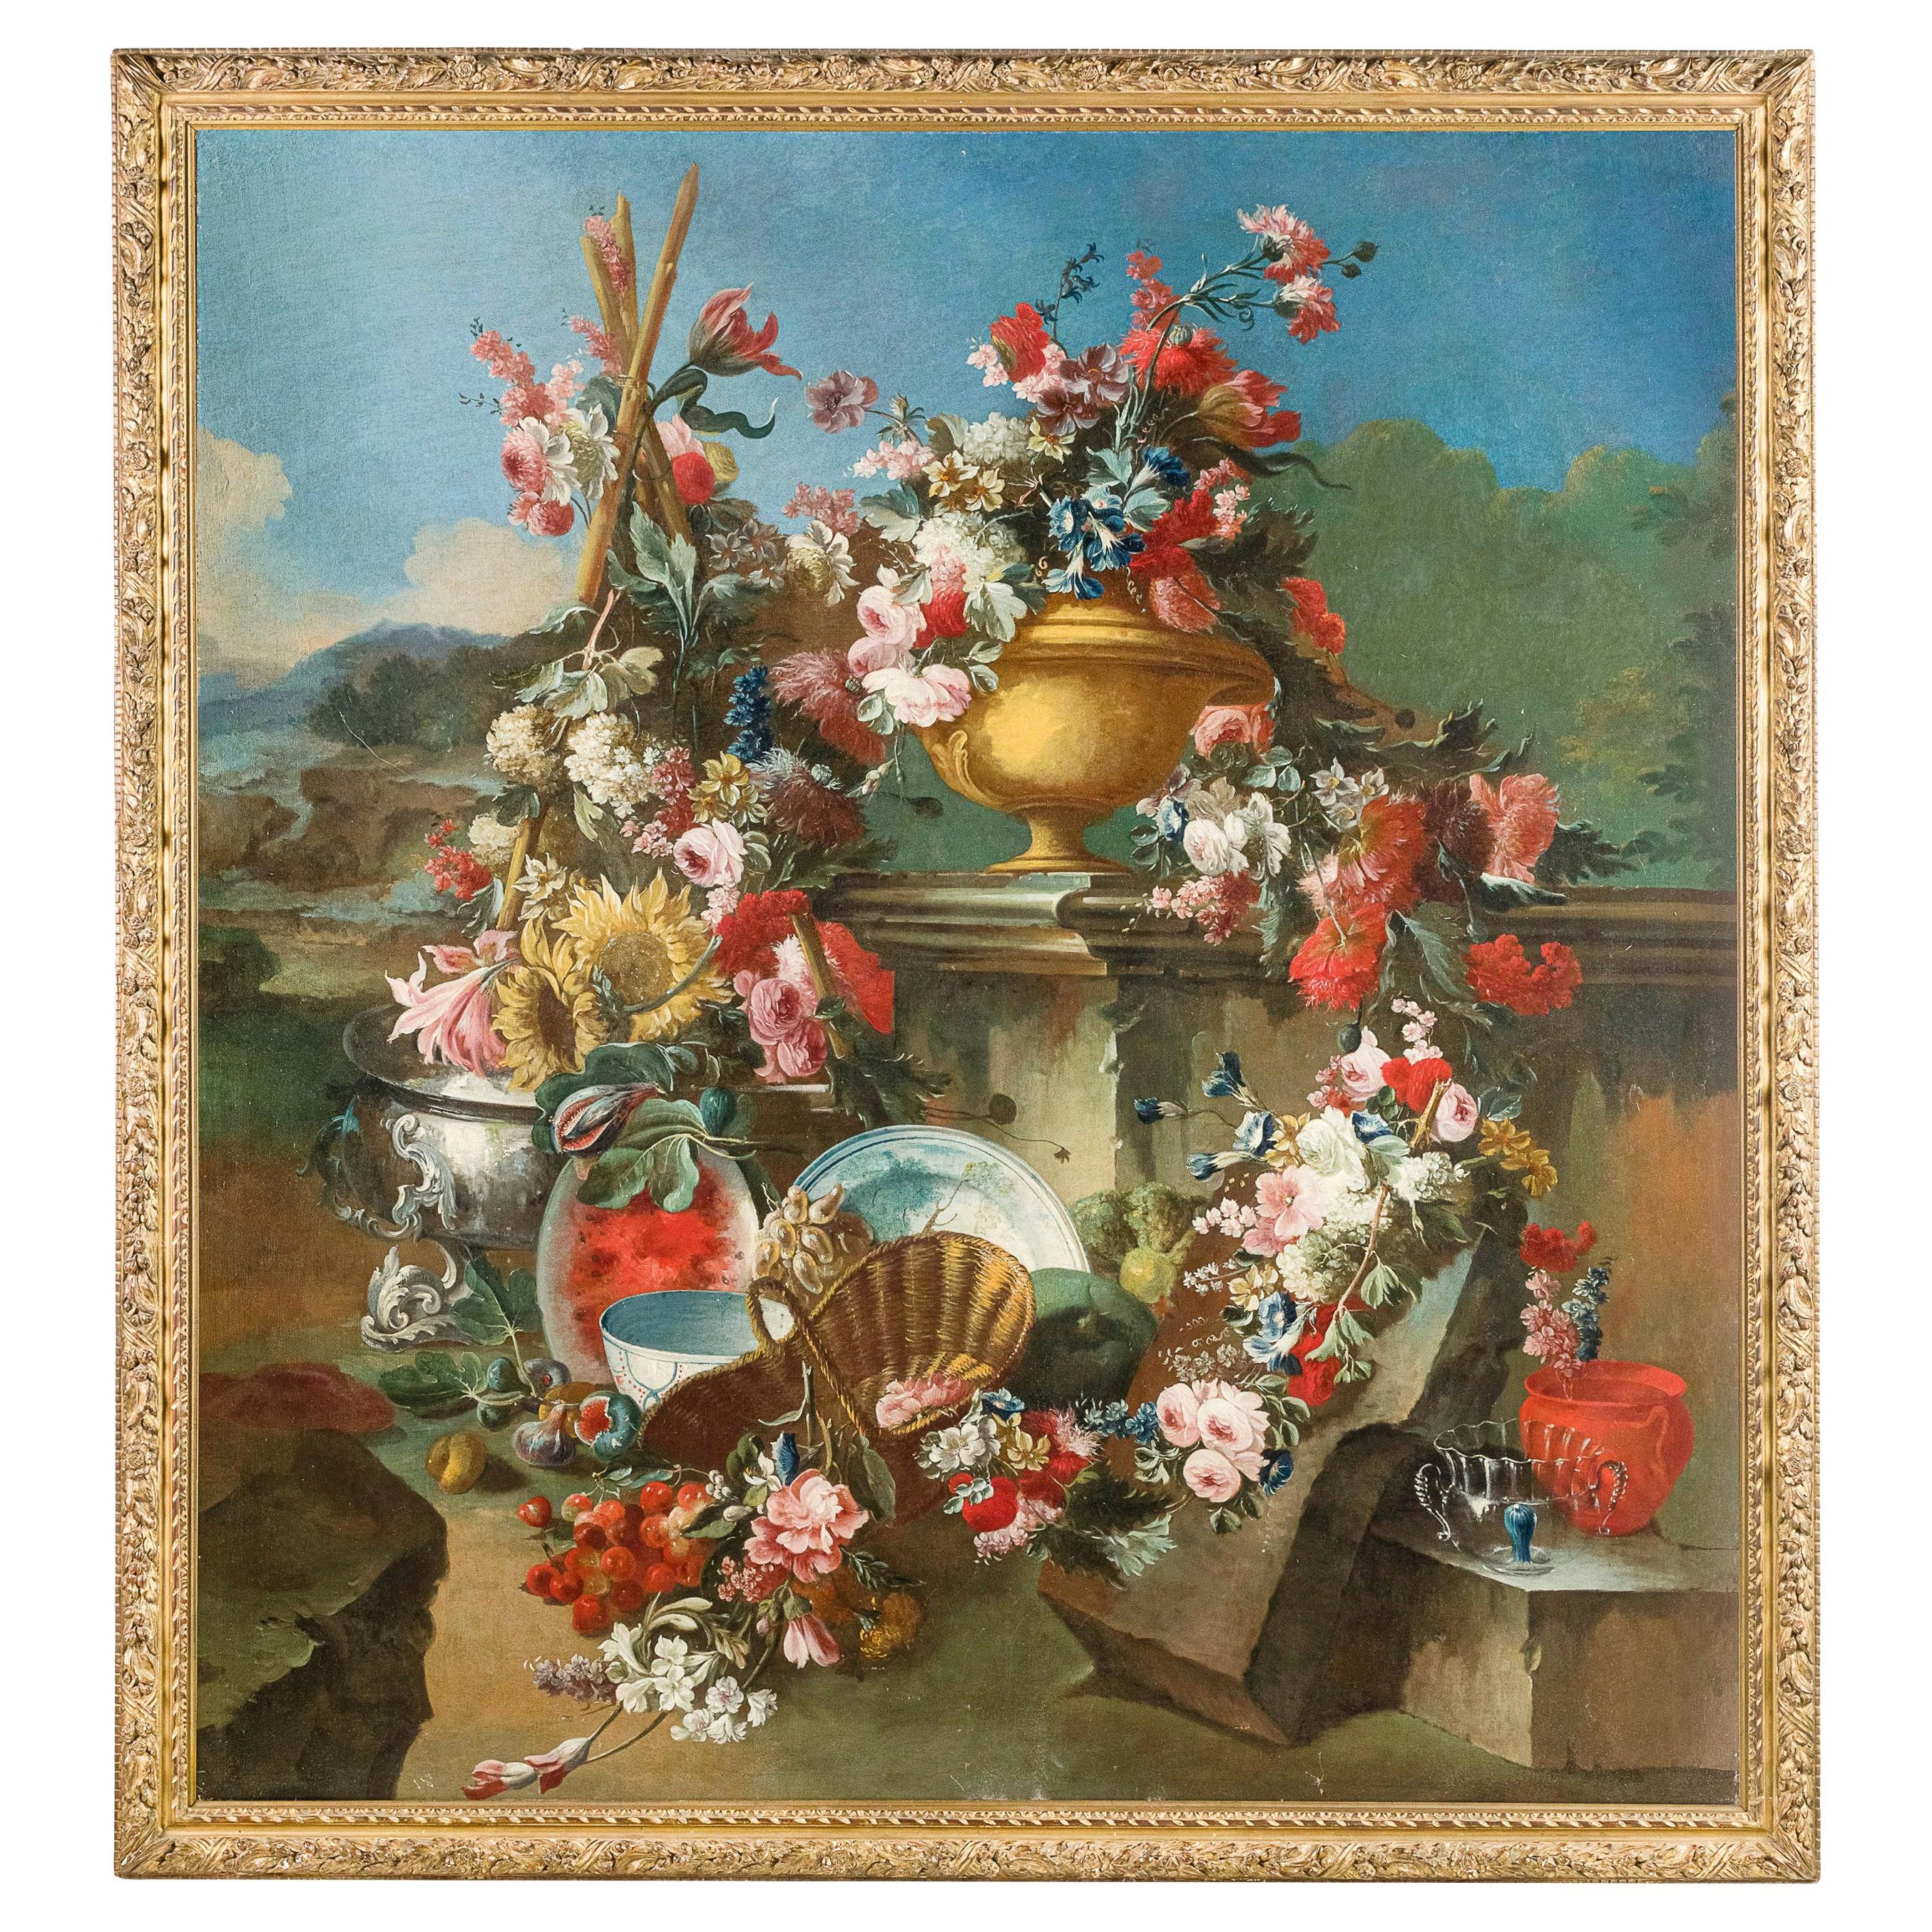 18th Century, Italian Painted with Still Life by Francesco Lavagna